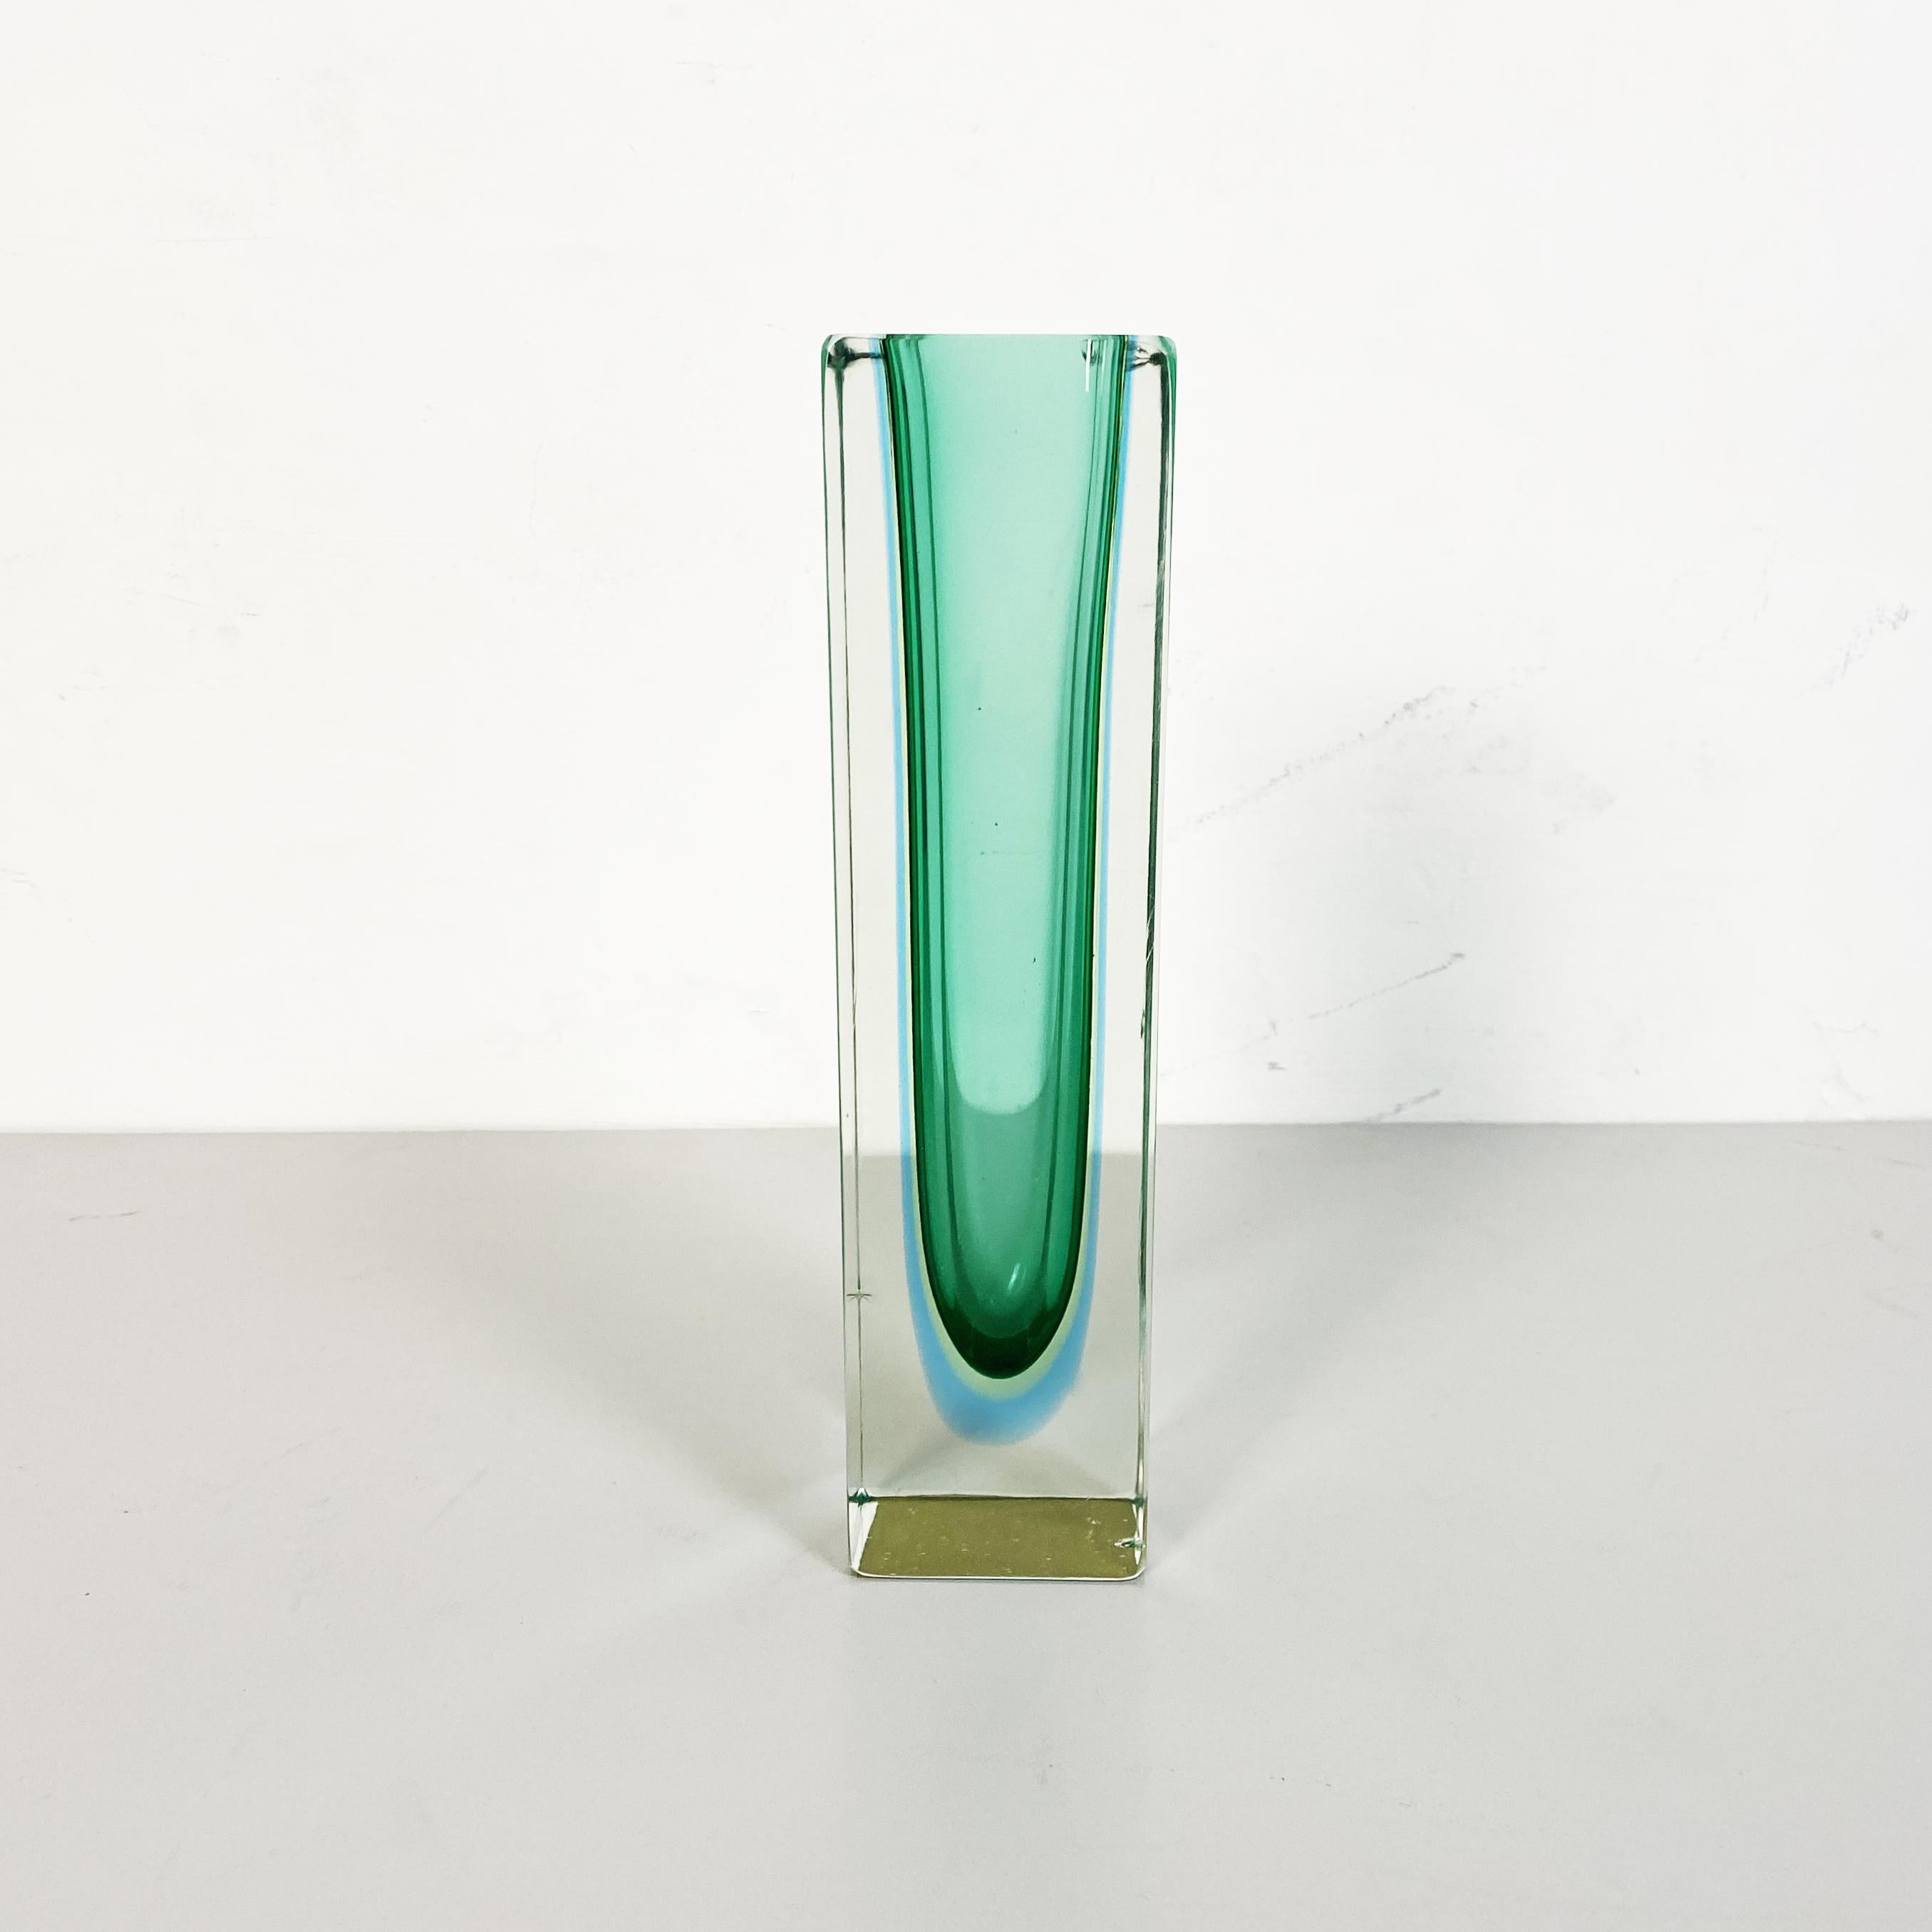 Italian mid-century Green Murano glass vase with internal blue shades, 1970s
Green Murano glass vase with internal blue shade. From the I Sommersi series.
1970s 
This Fantastic series of Murano glass vase with various colored shades, is the 